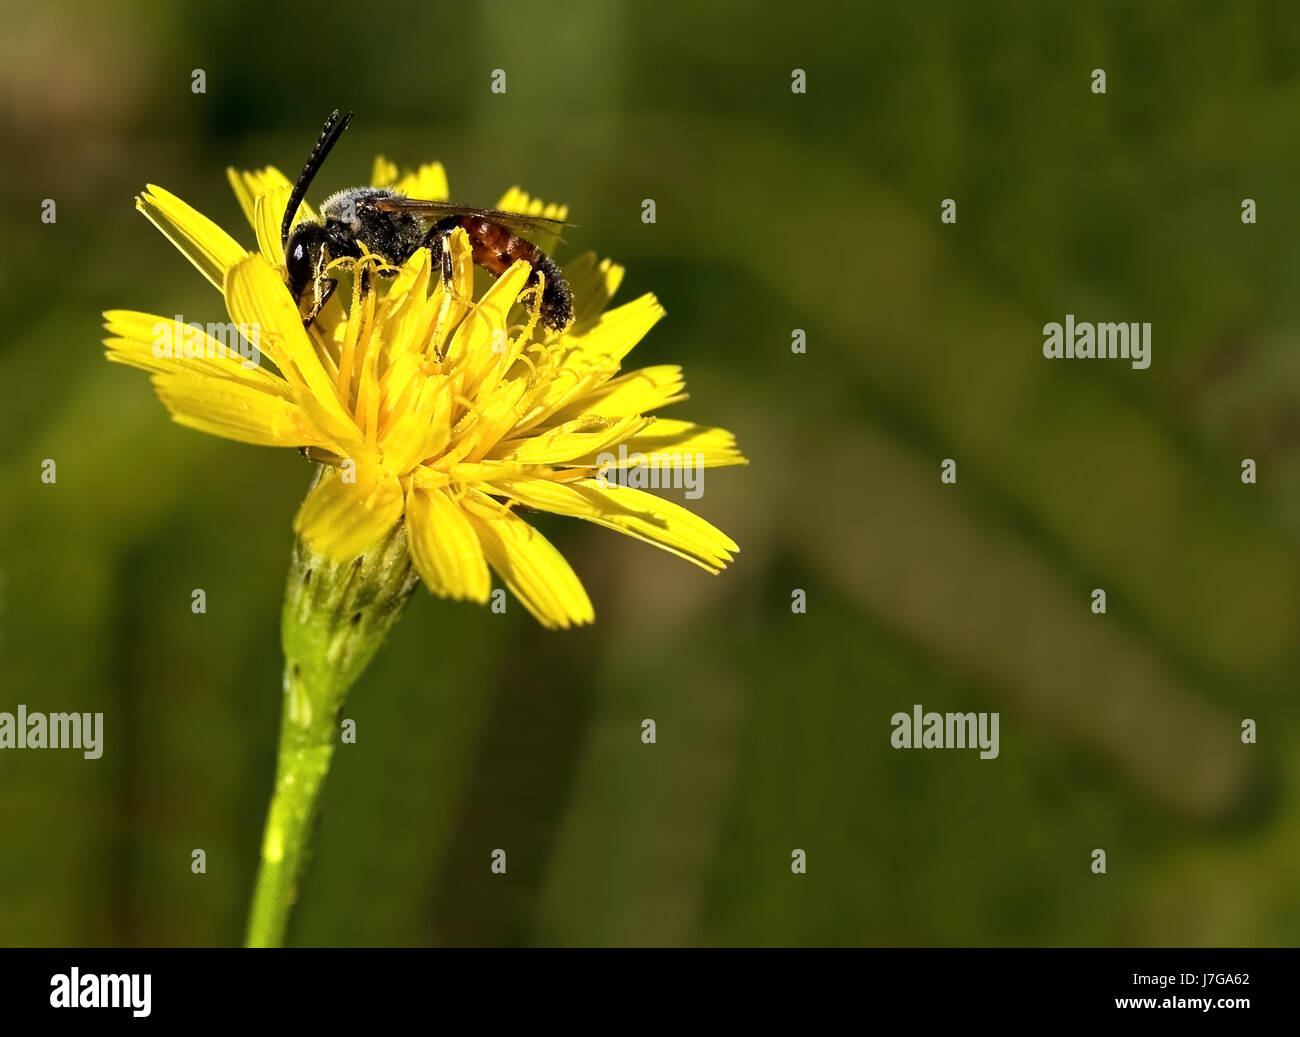 insect flower meadow dandelion fall autumn insect green flower meadow dandelion Stock Photo